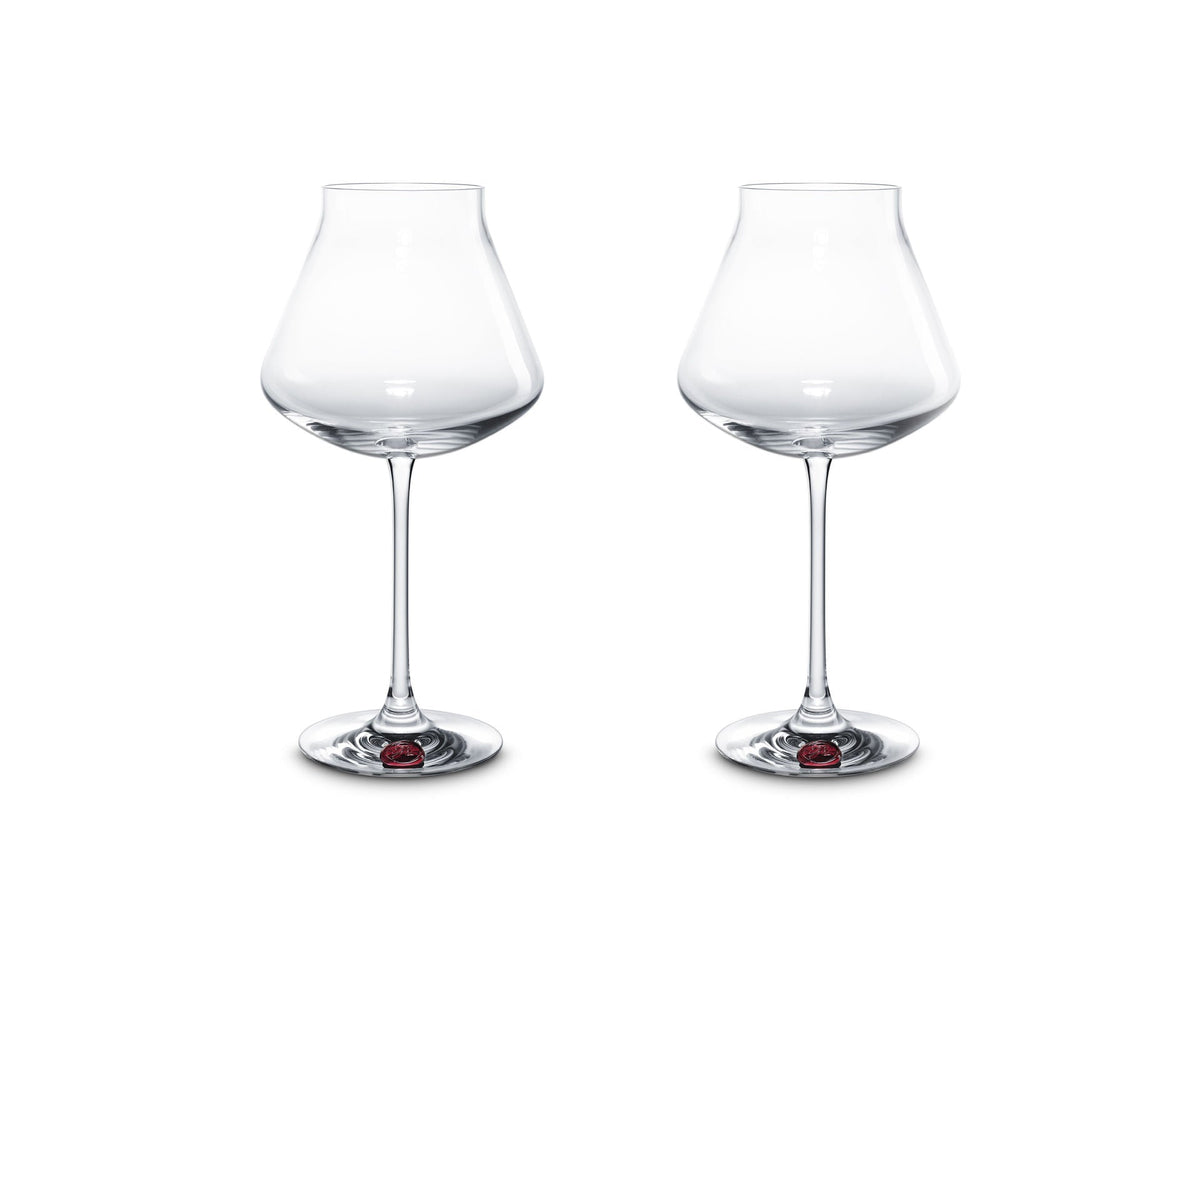 XL Chateau Baccarat w/Red Seal, Set of 2 (Retired)